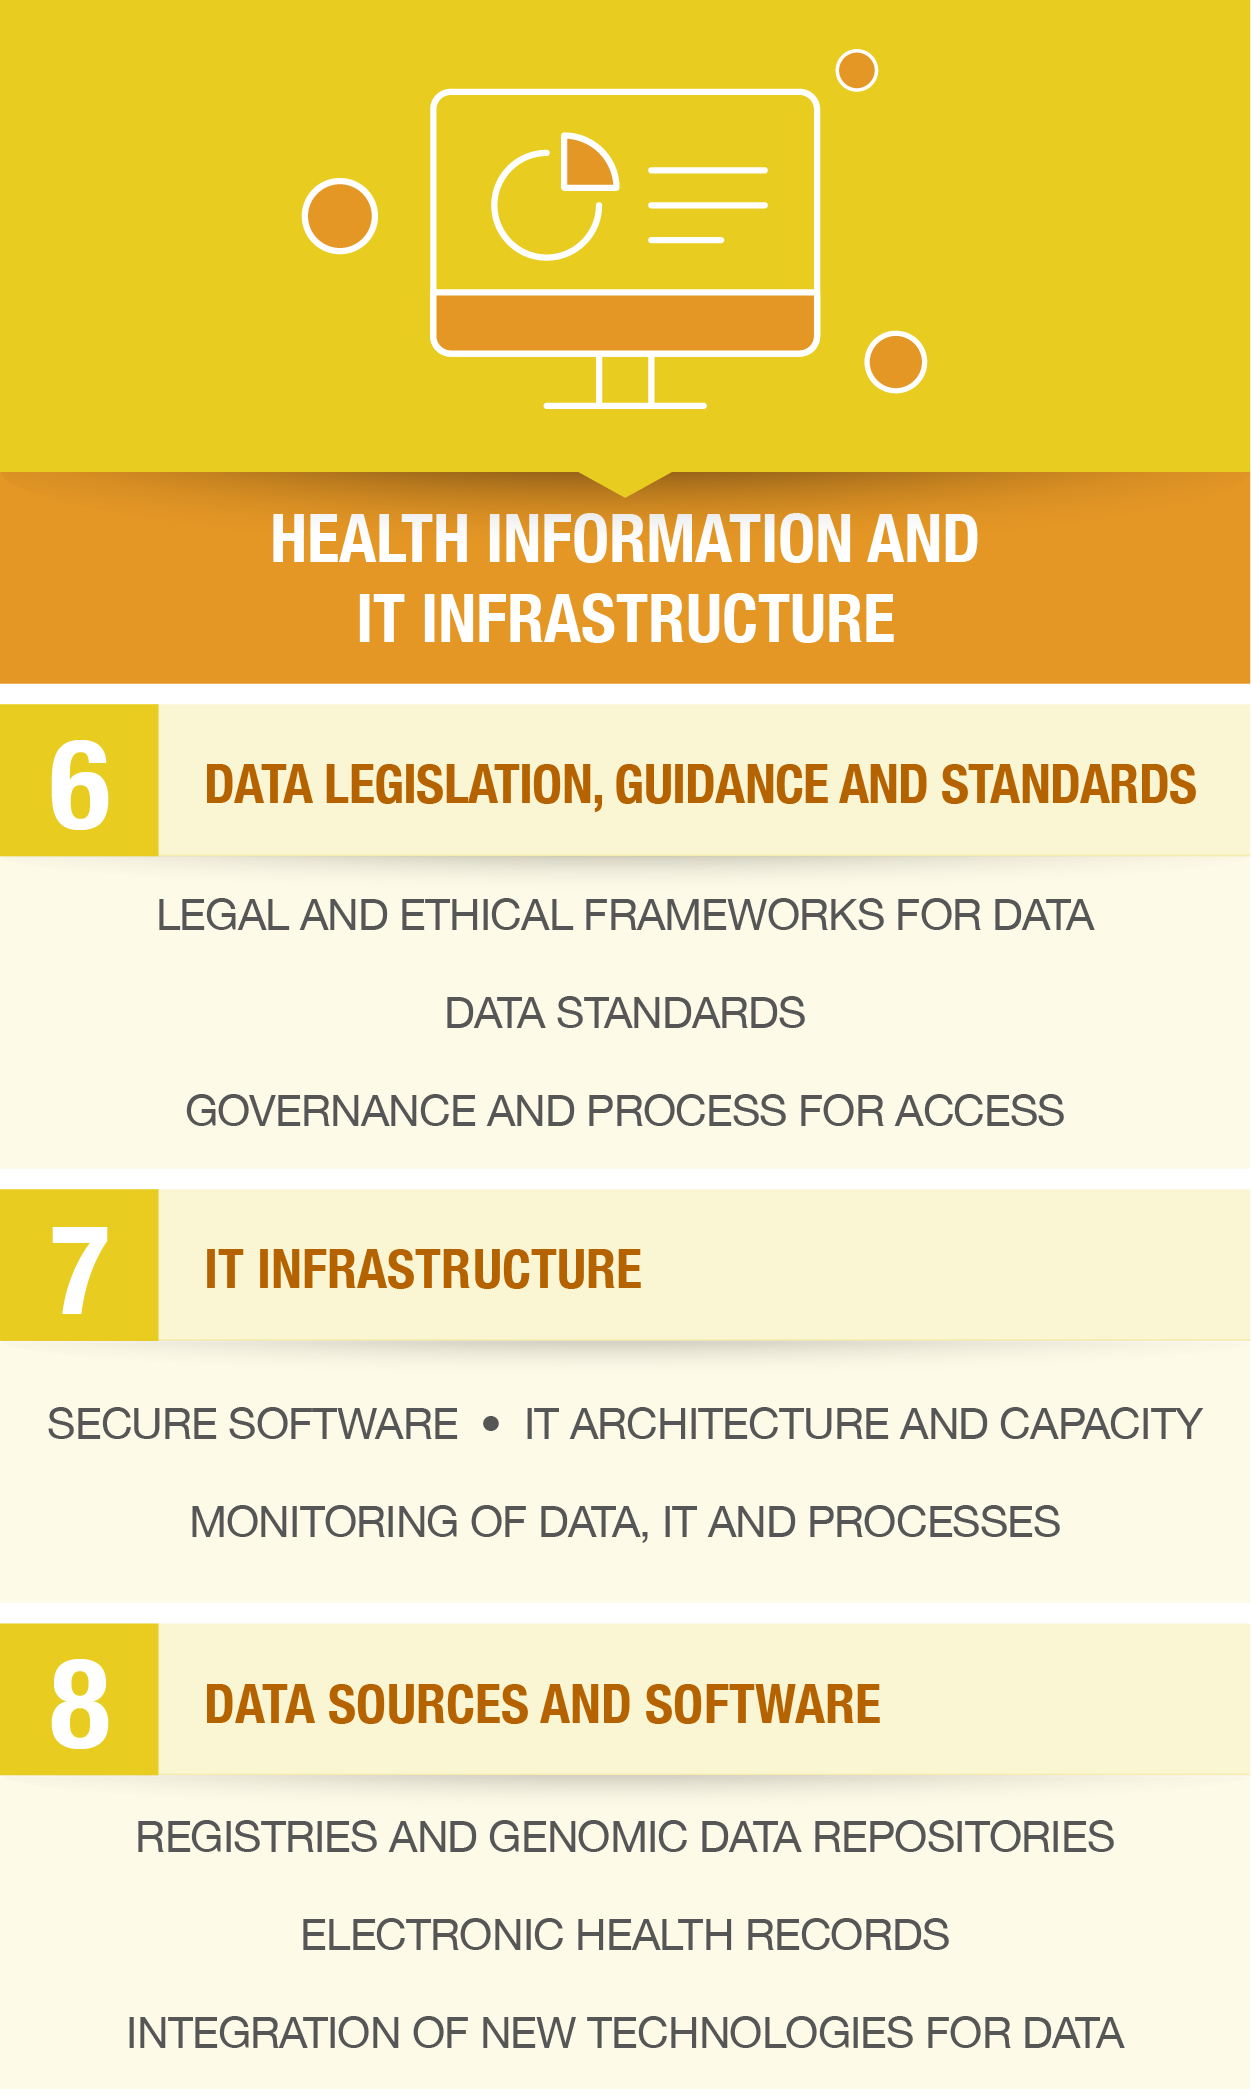 Health information and IT infrastructure building block